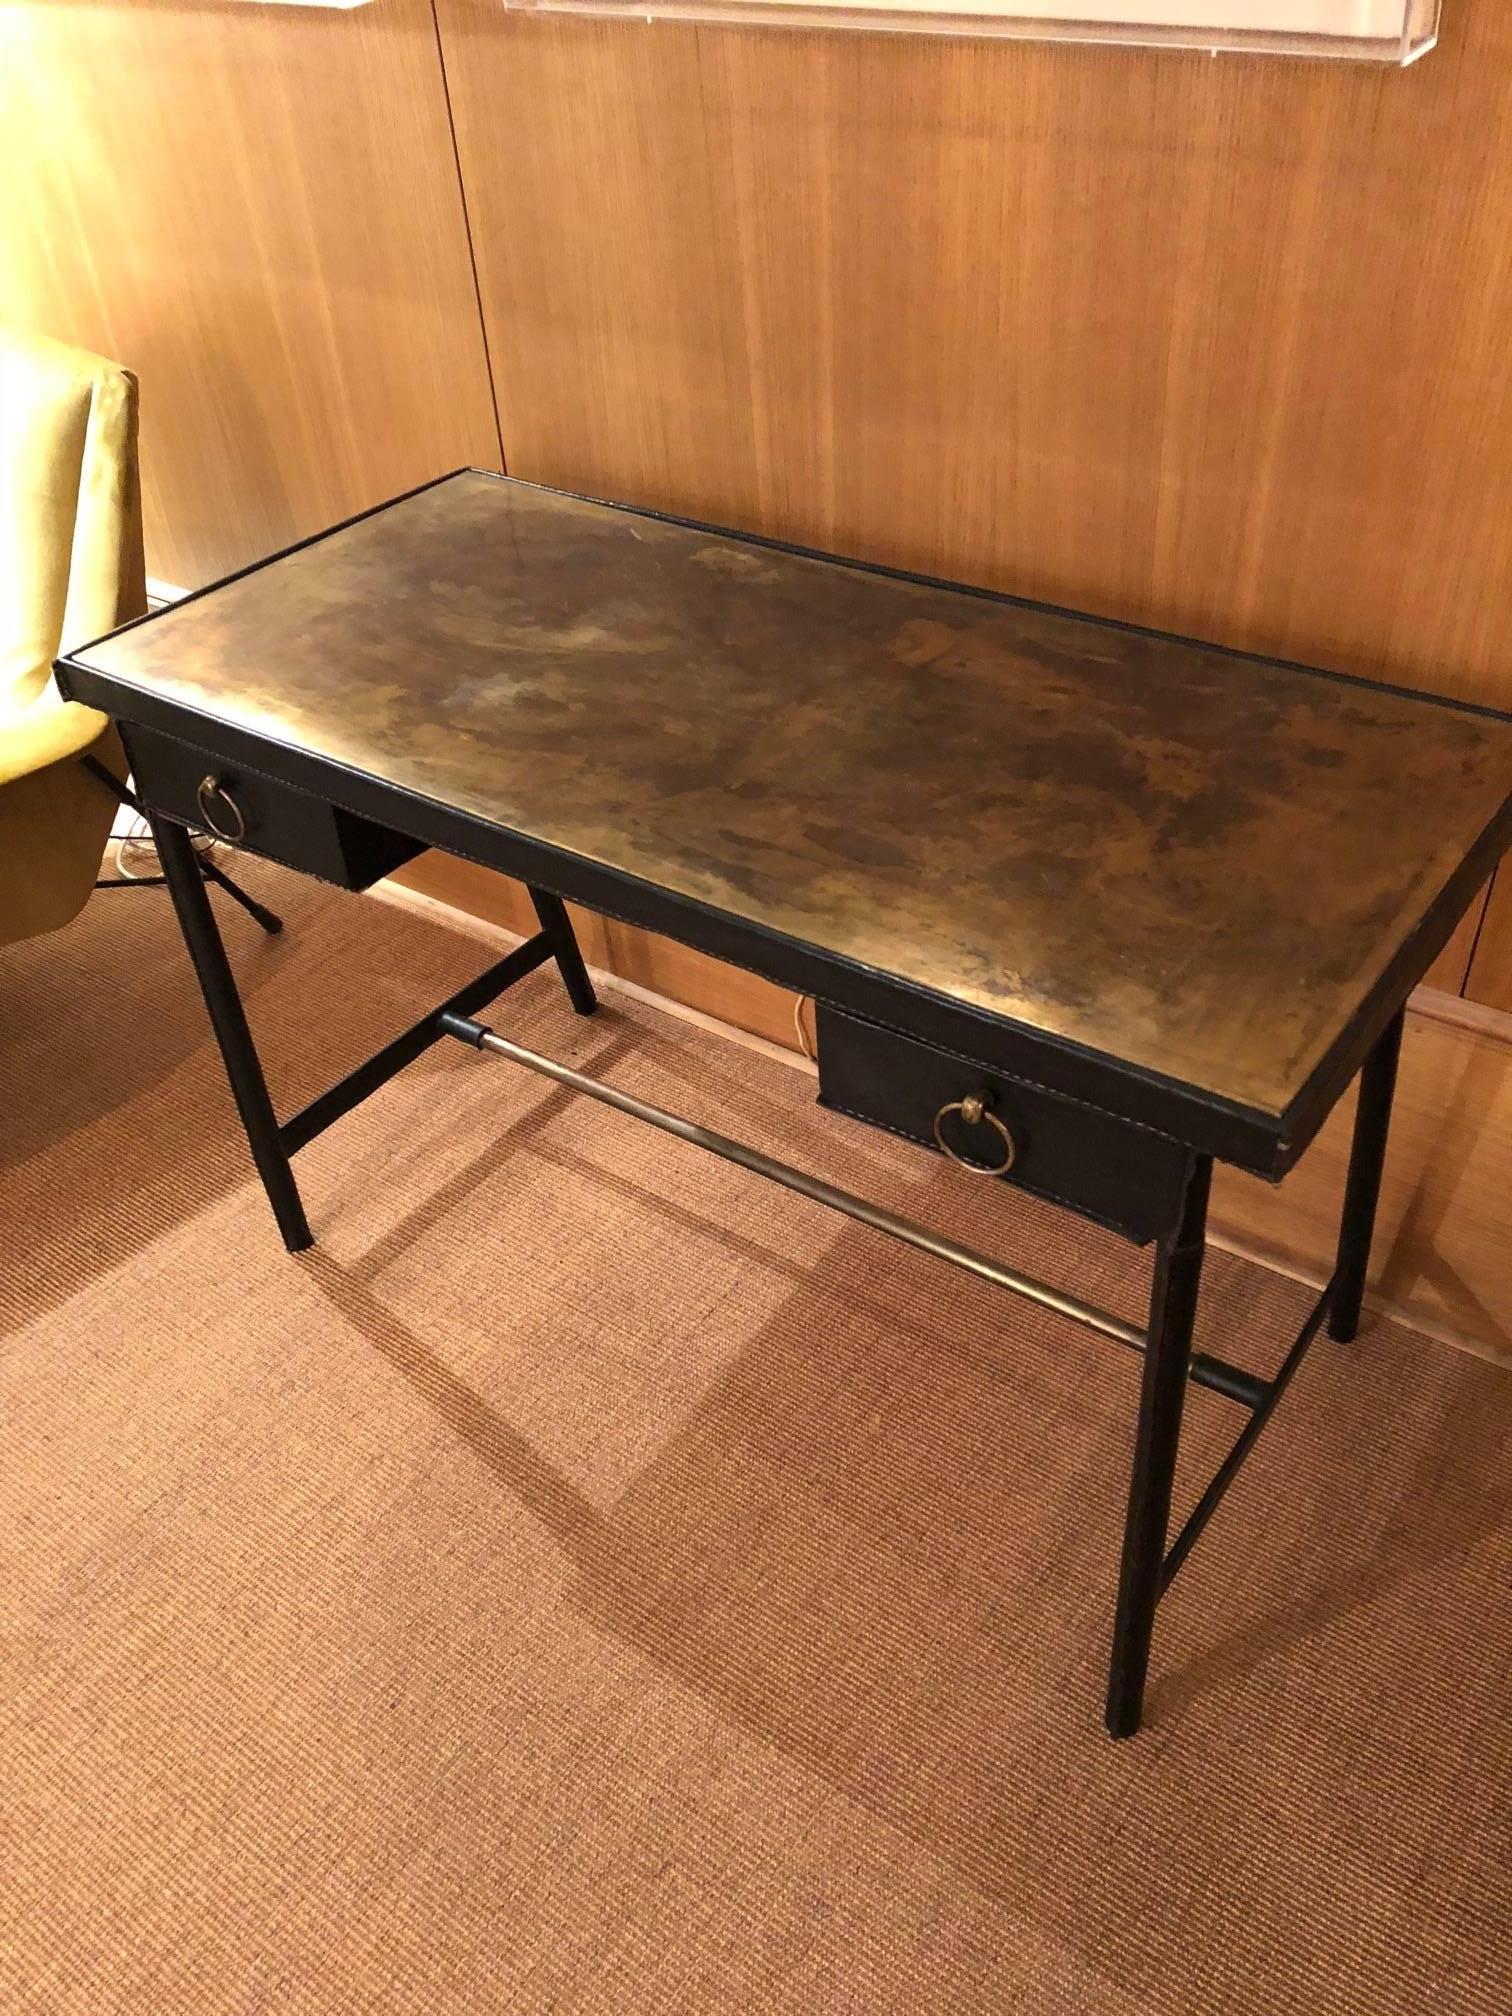 Jacques Adnet desk in its original black leather cover and brass shelf, very rare.
Vintage black leather hand-stitched piqué-sellier, tubular metal structure gained with leather.
Typical work of the 1950s.